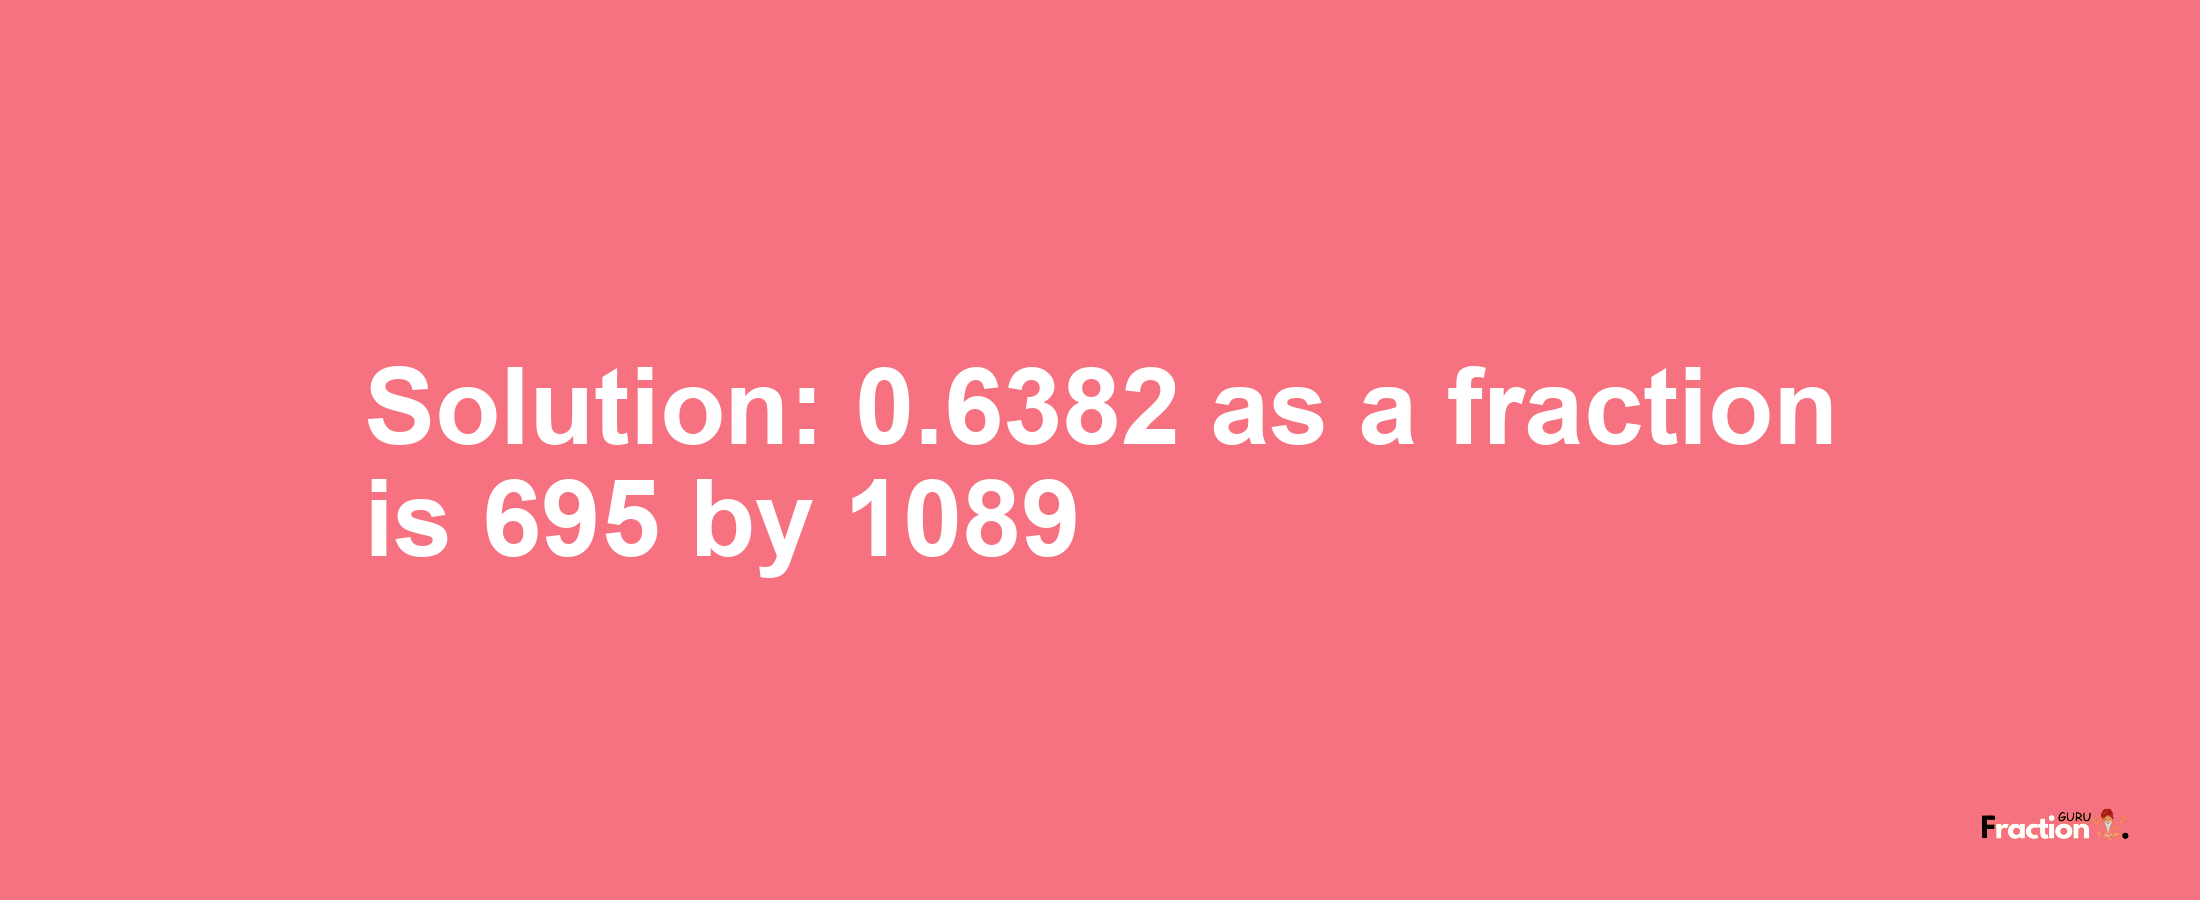 Solution:0.6382 as a fraction is 695/1089